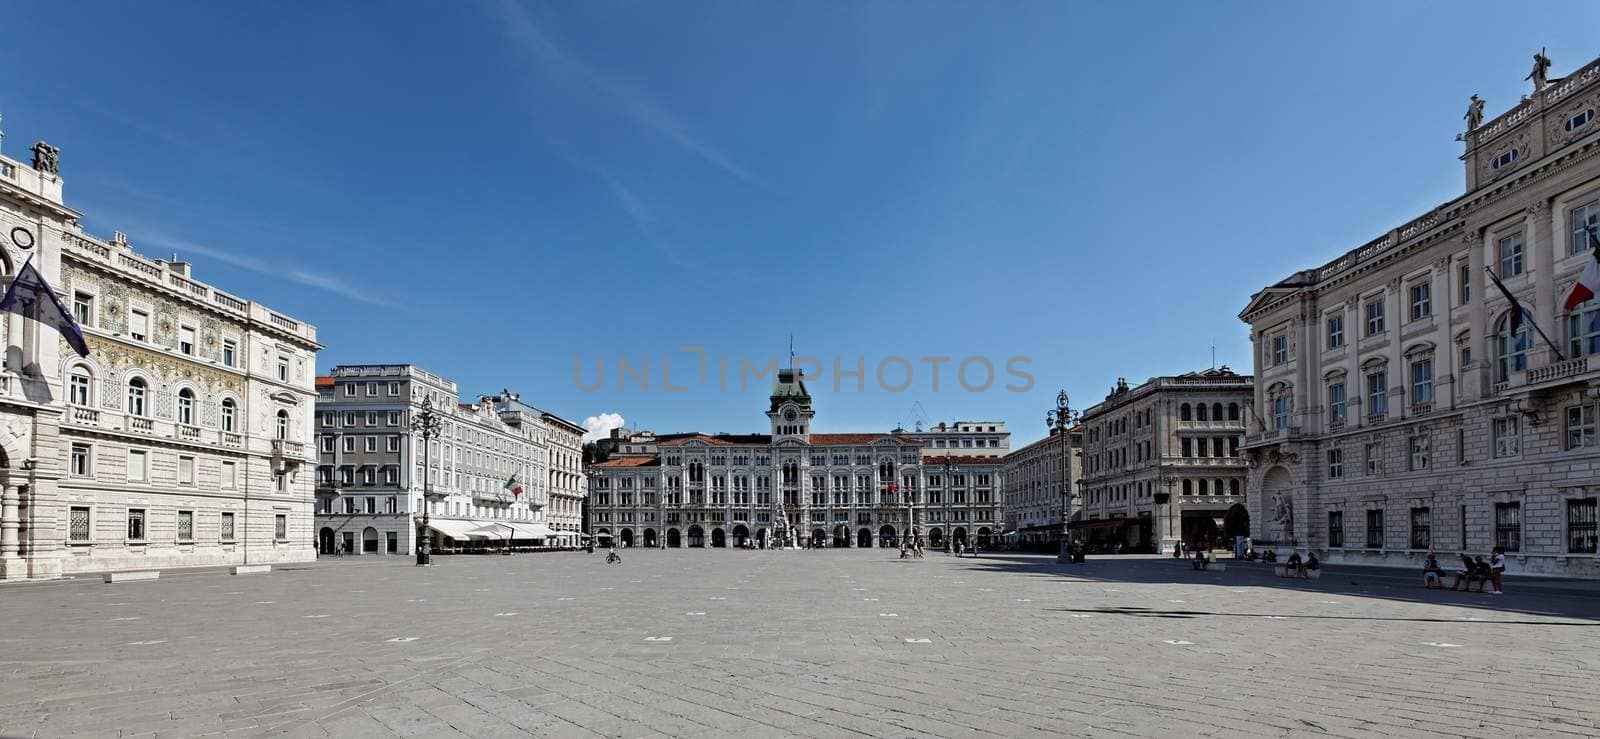 Main square of Trieste, Italy